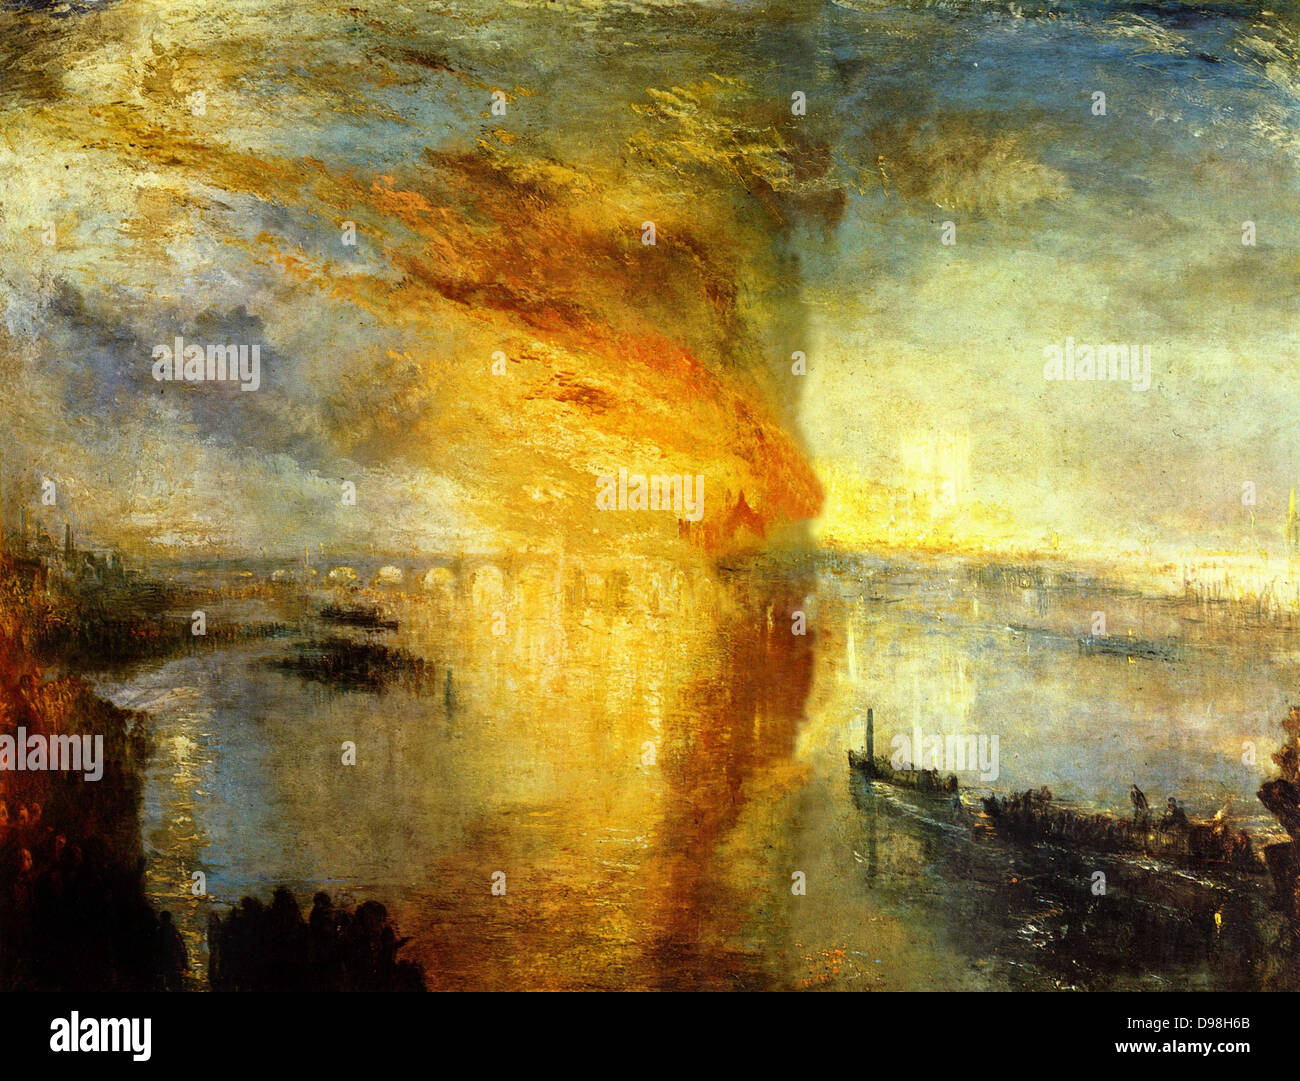 Joseph Mallord William Turner (1775-1851) English artist., The Burning of the Houses of Parliament, 1834 Stock Photo